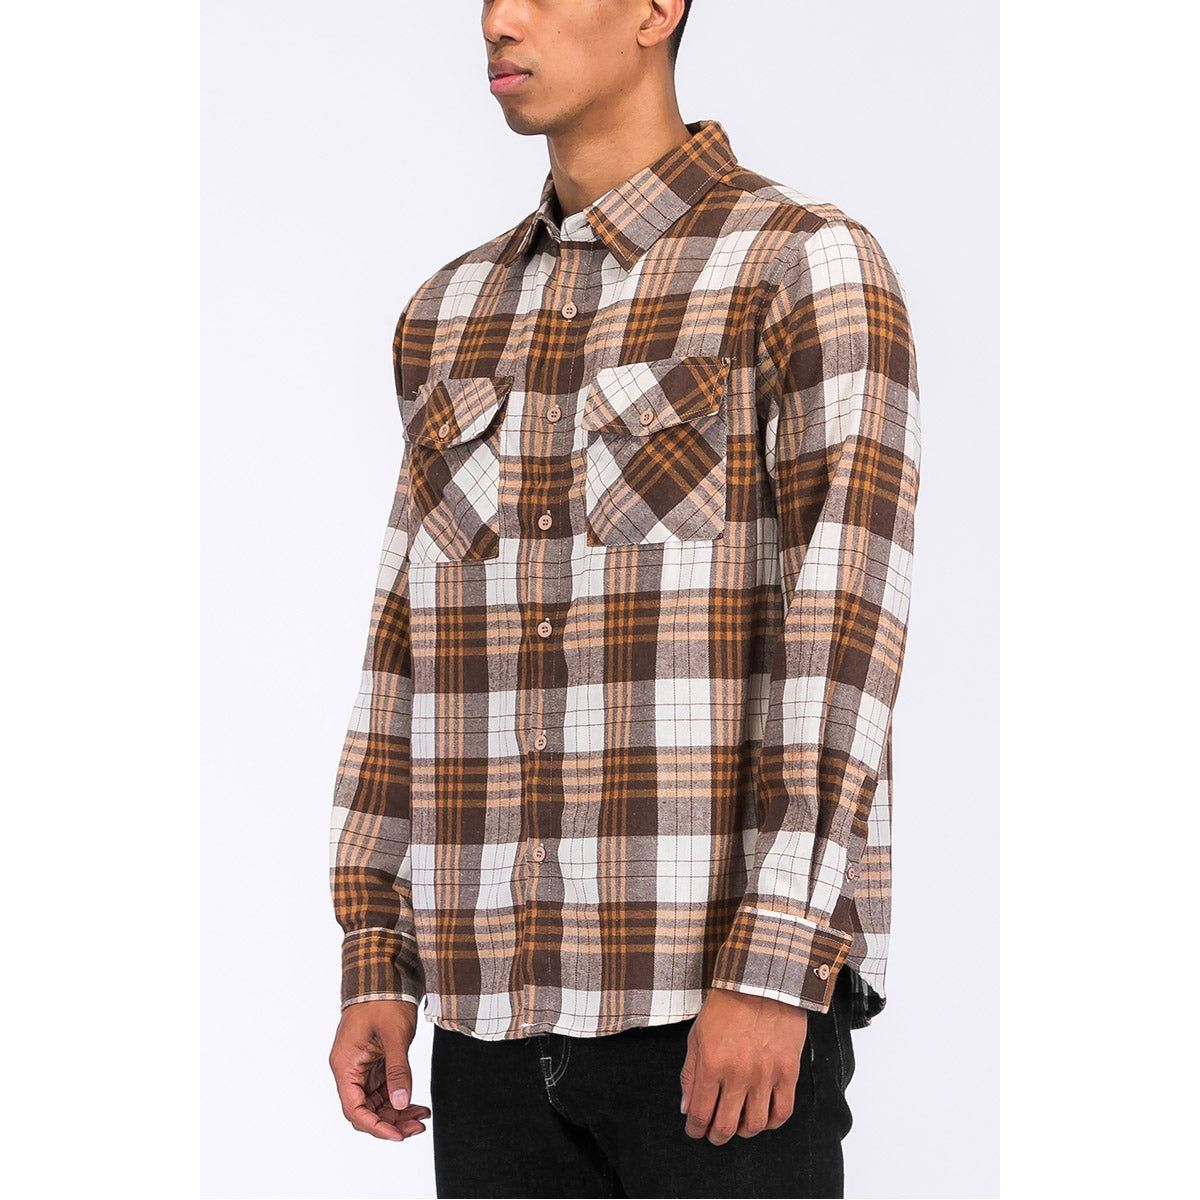 Brushed Flannel Shirt - KME means the very best